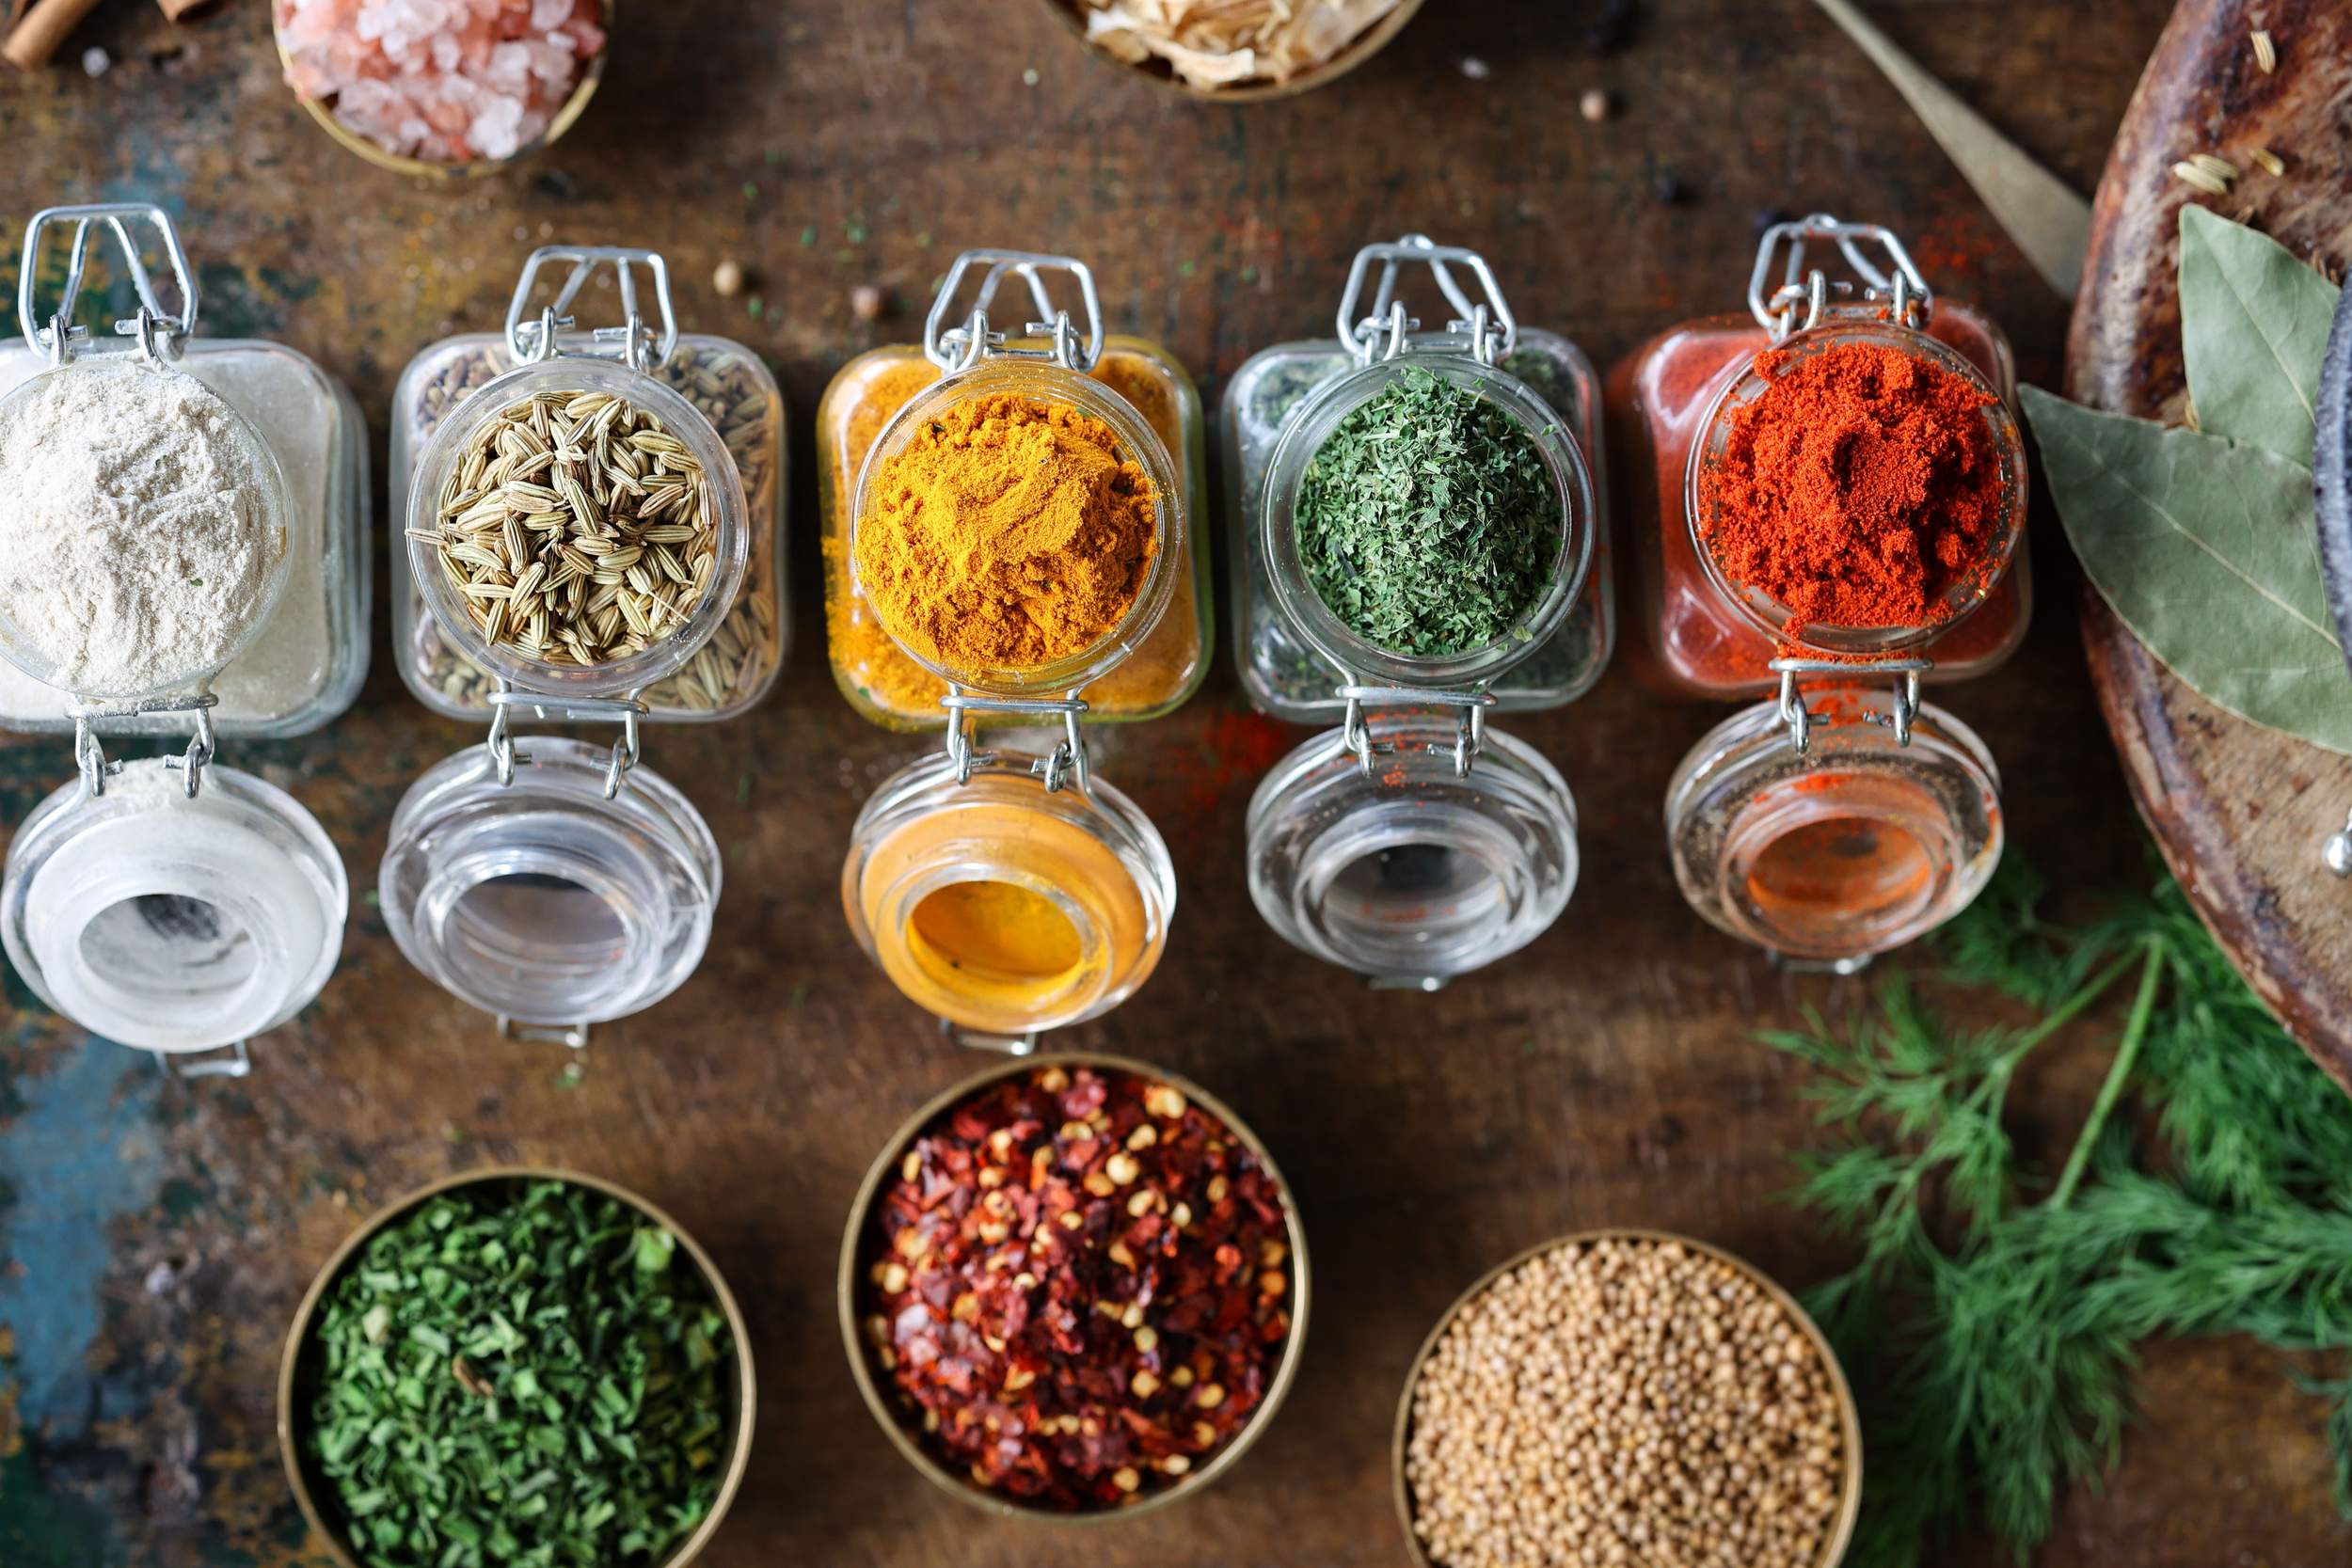 Spices and Herbs:
